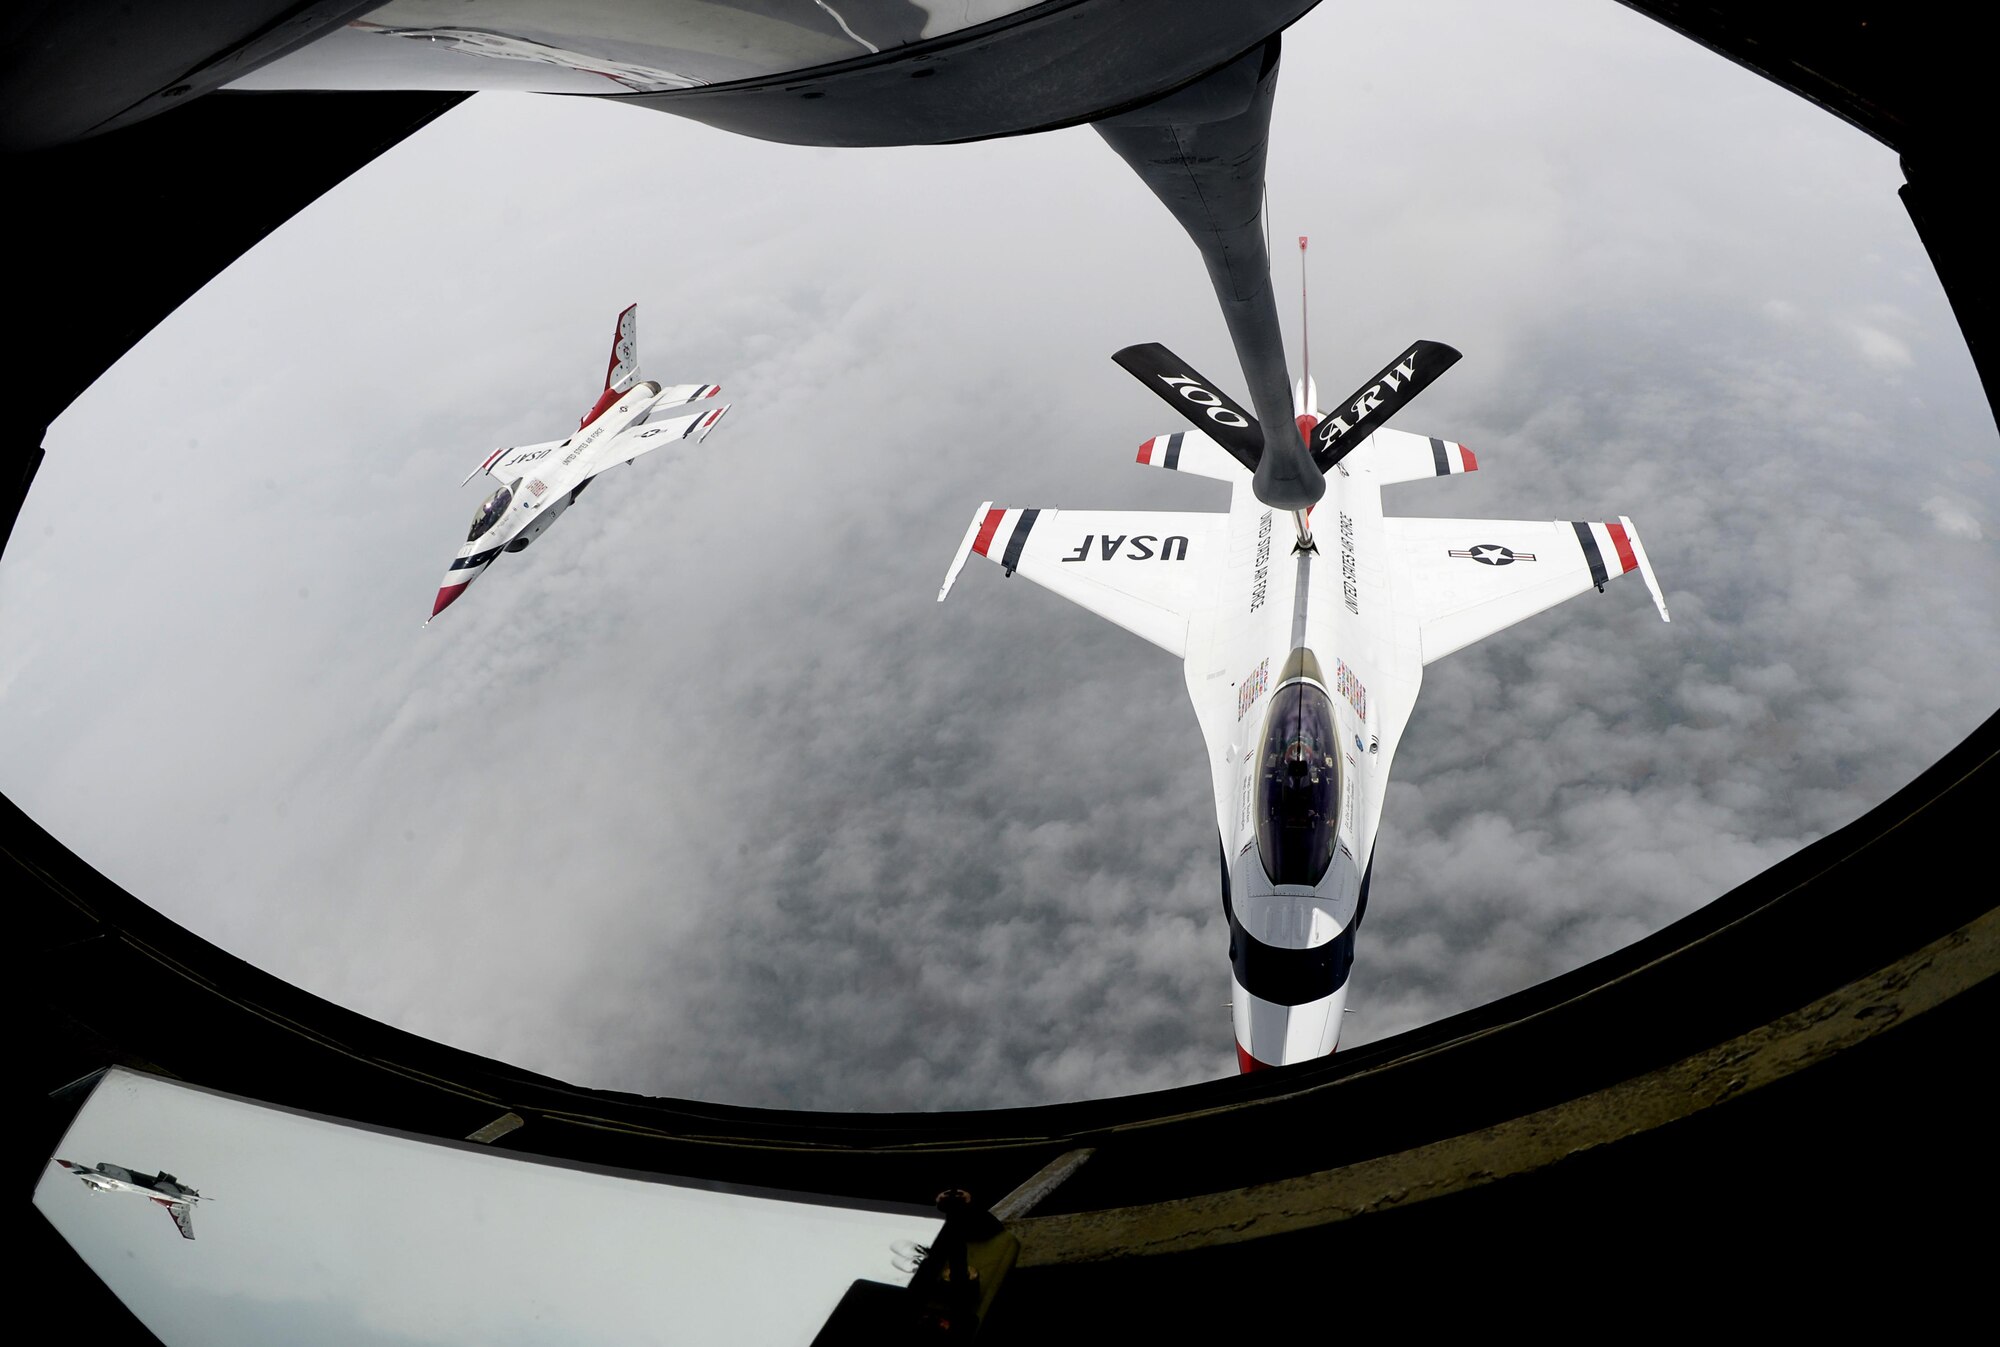 A U.S. Air Force Thunderbird receives fuel from a U.S. Air Force KC-135 Stratotanker assigned to the 351st Air Refueling Squadron, July 10, 2017, during a refueling mission over the United Kingdom. The Thunderbirds are in the European theater for Bastille Day and the 2017 Royal International Air Tattoo airshow. (U.S. Air Force photo by Senior Airman Justine Rho)